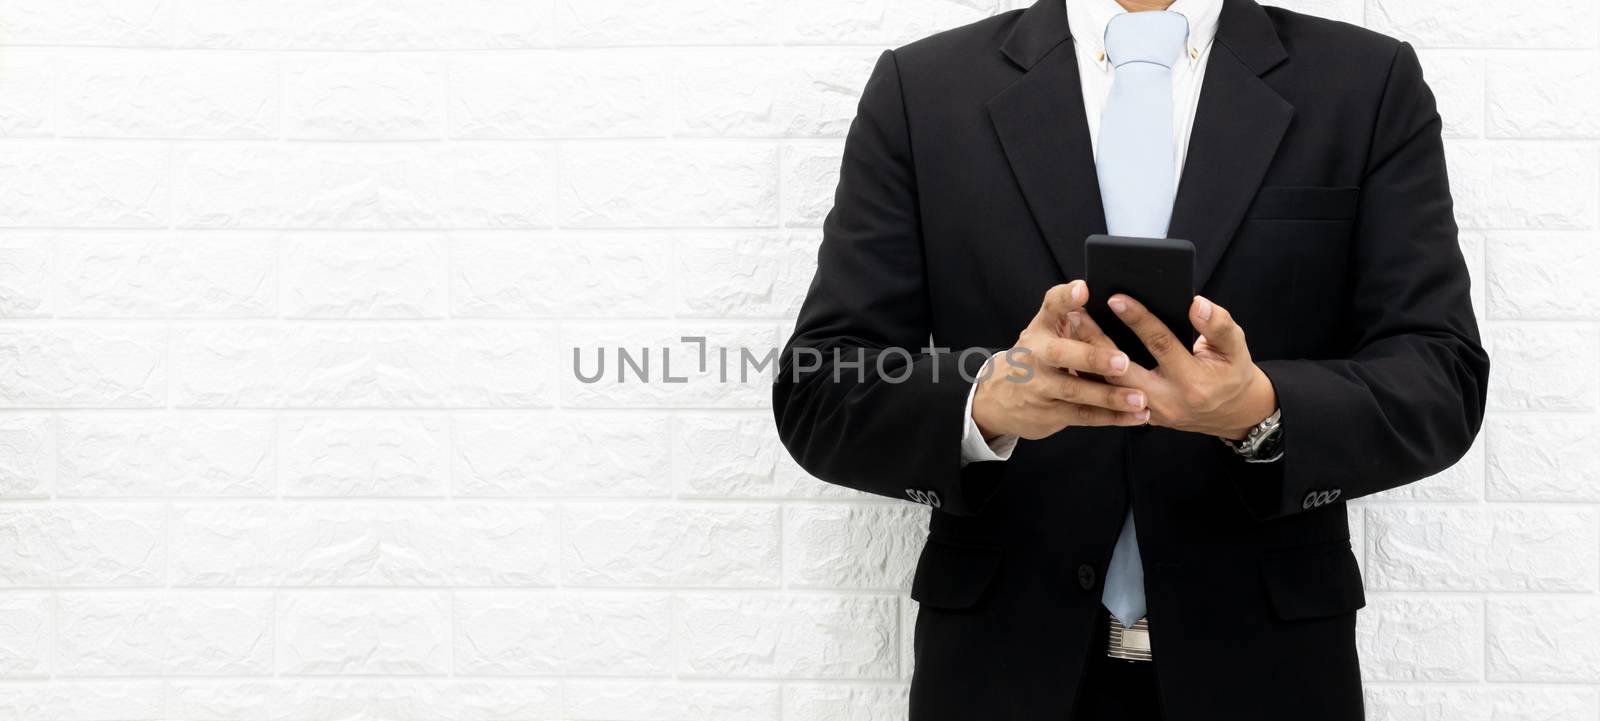 Business men hold smartphones to check information at the office by sompongtom